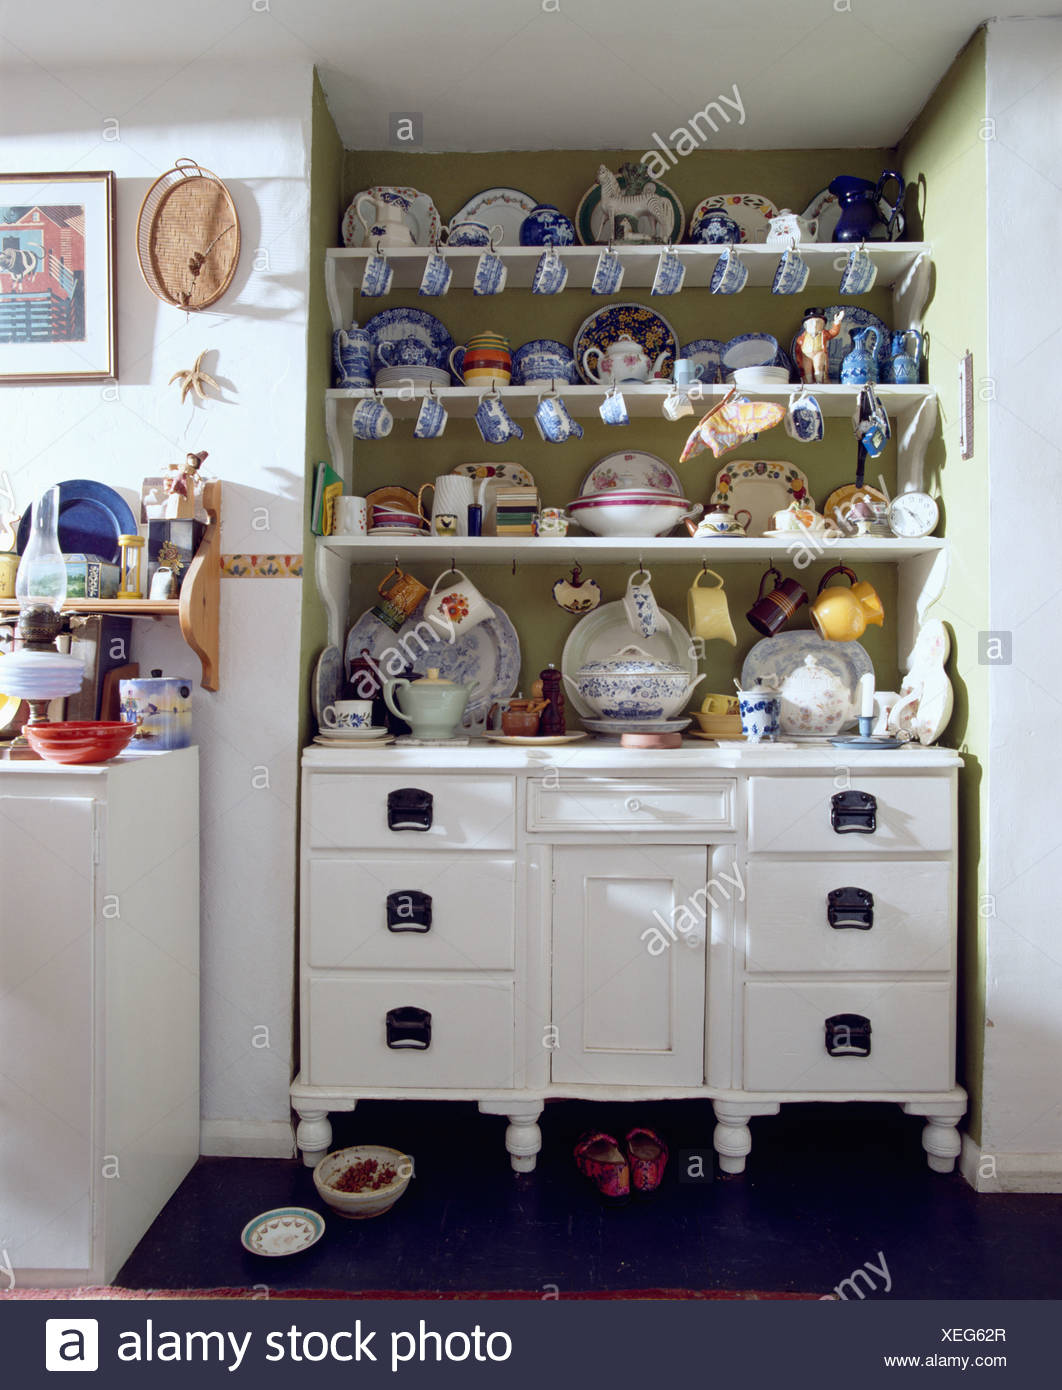 Cups And Plates On Painted White Dresser In White Cottage Kitchen